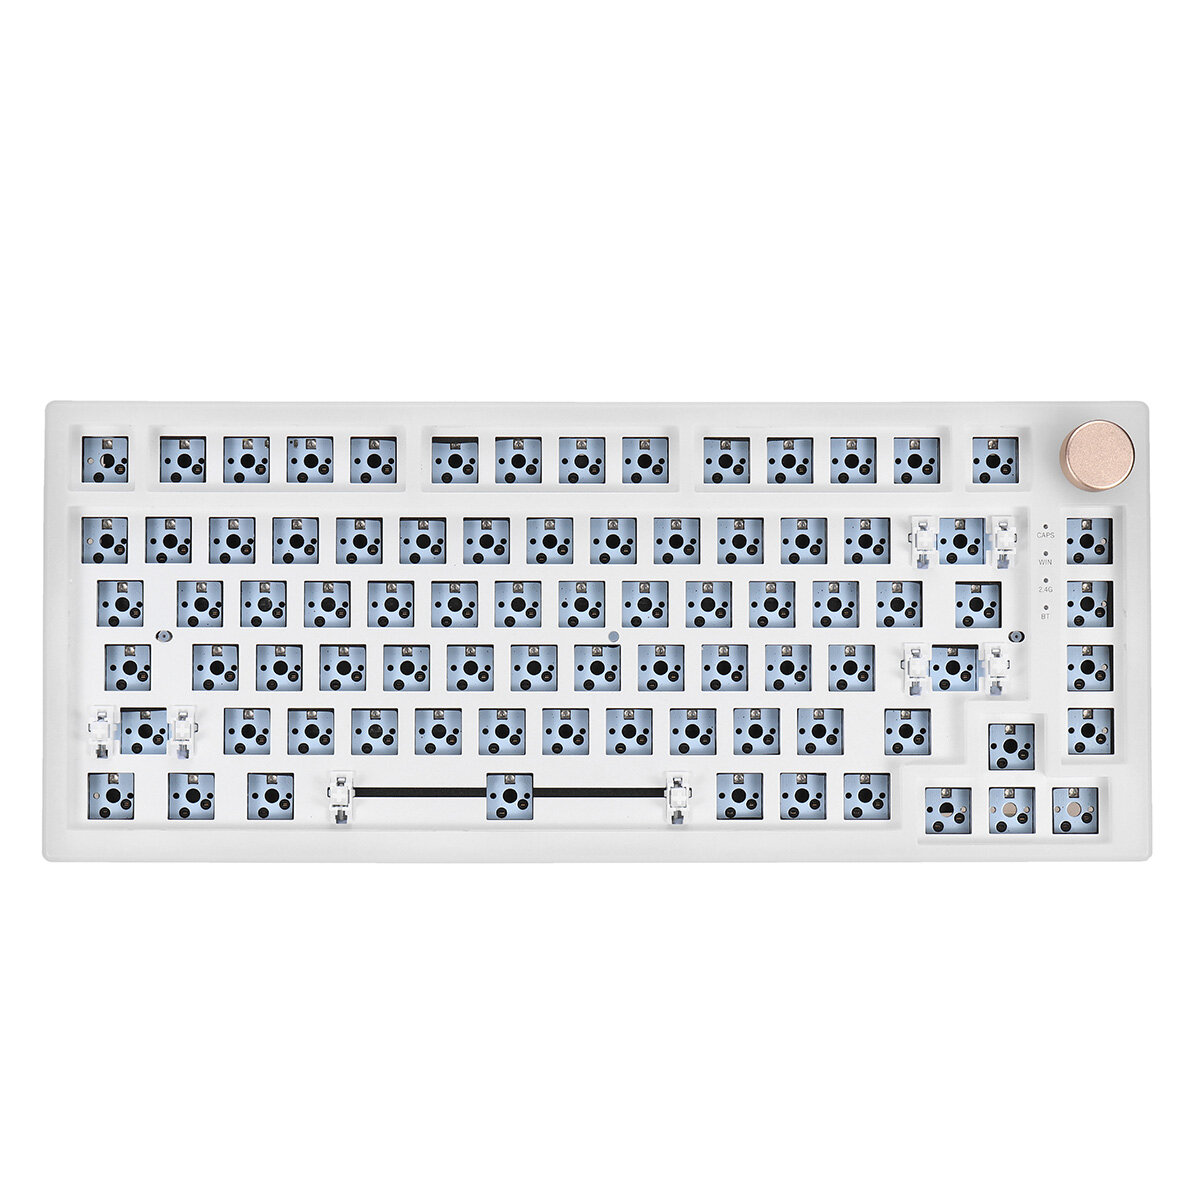 Image of FEKER IK75 PRO Keyboard Customized Kit 82 Keys Hot Swappable 75% RGB Wired bluetooth 50 24GHz Triple Mode PCB Mounting